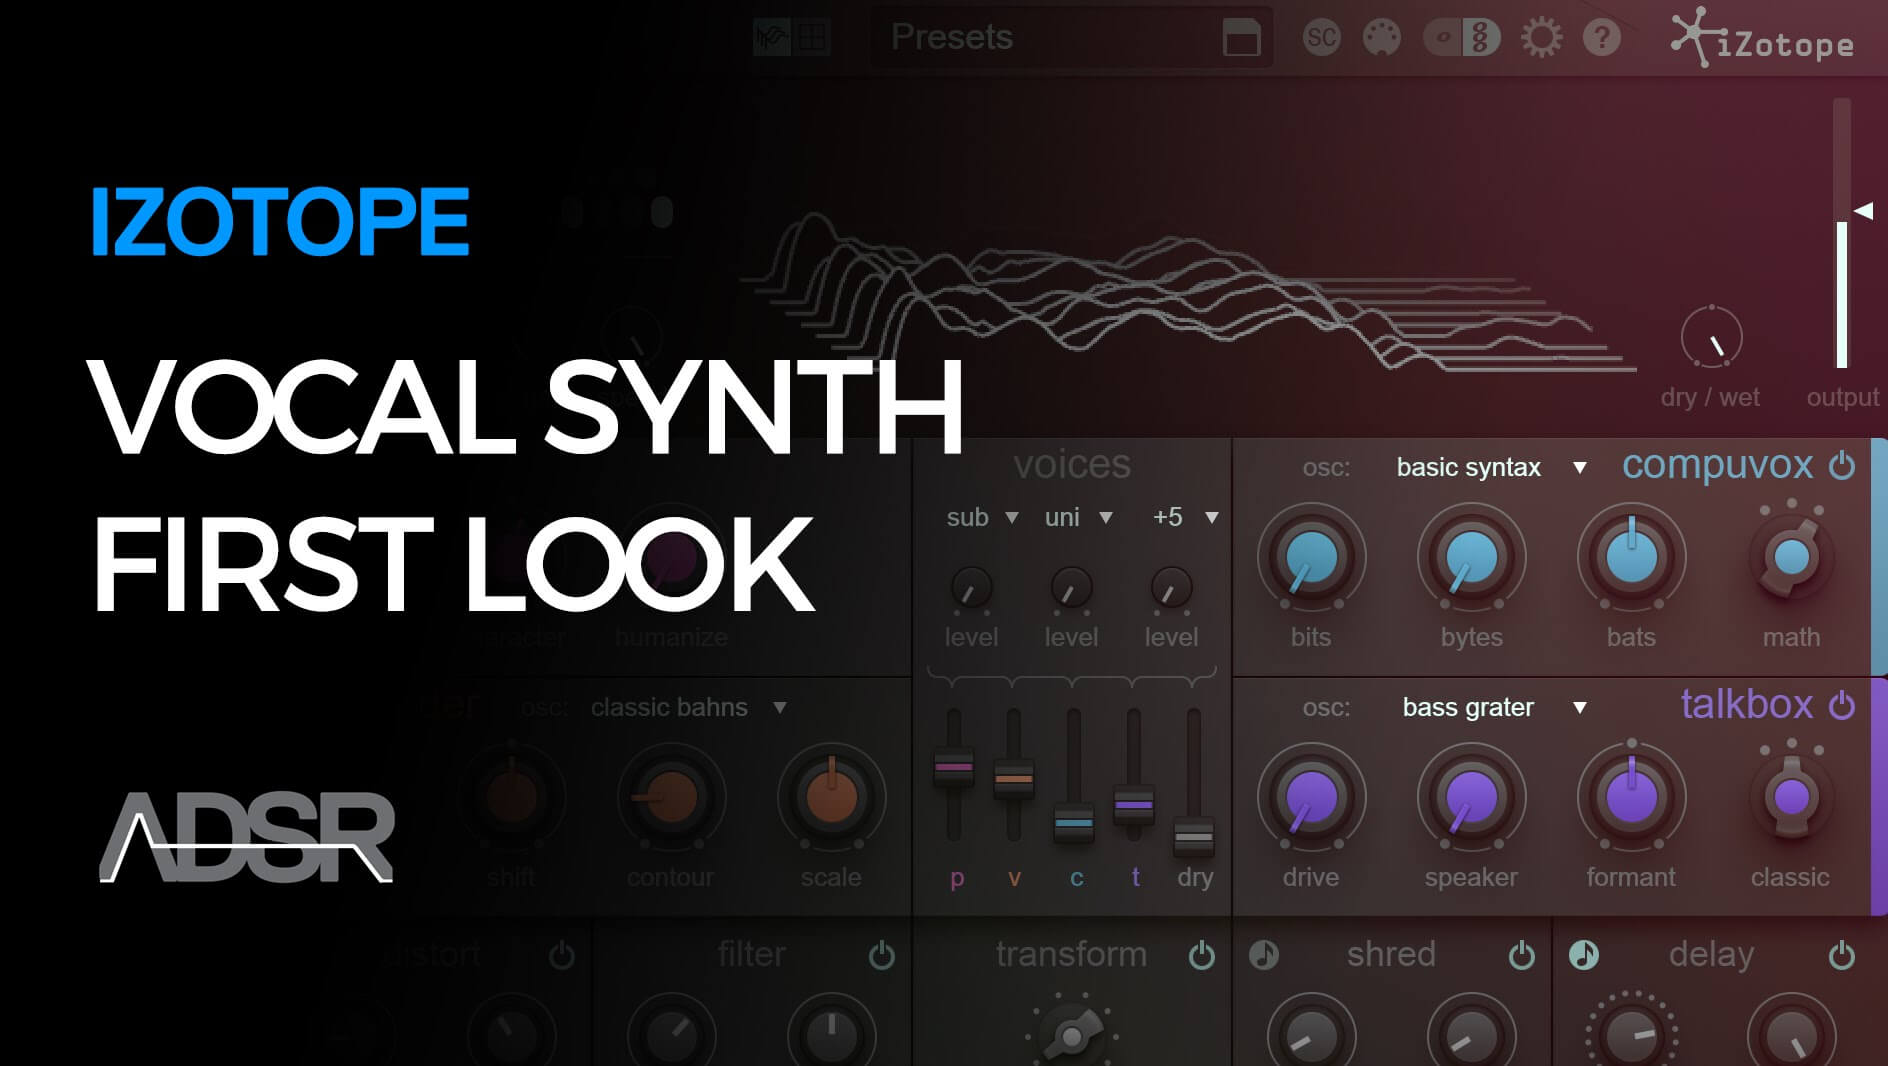 download the last version for ios iZotope VocalSynth 2.6.1